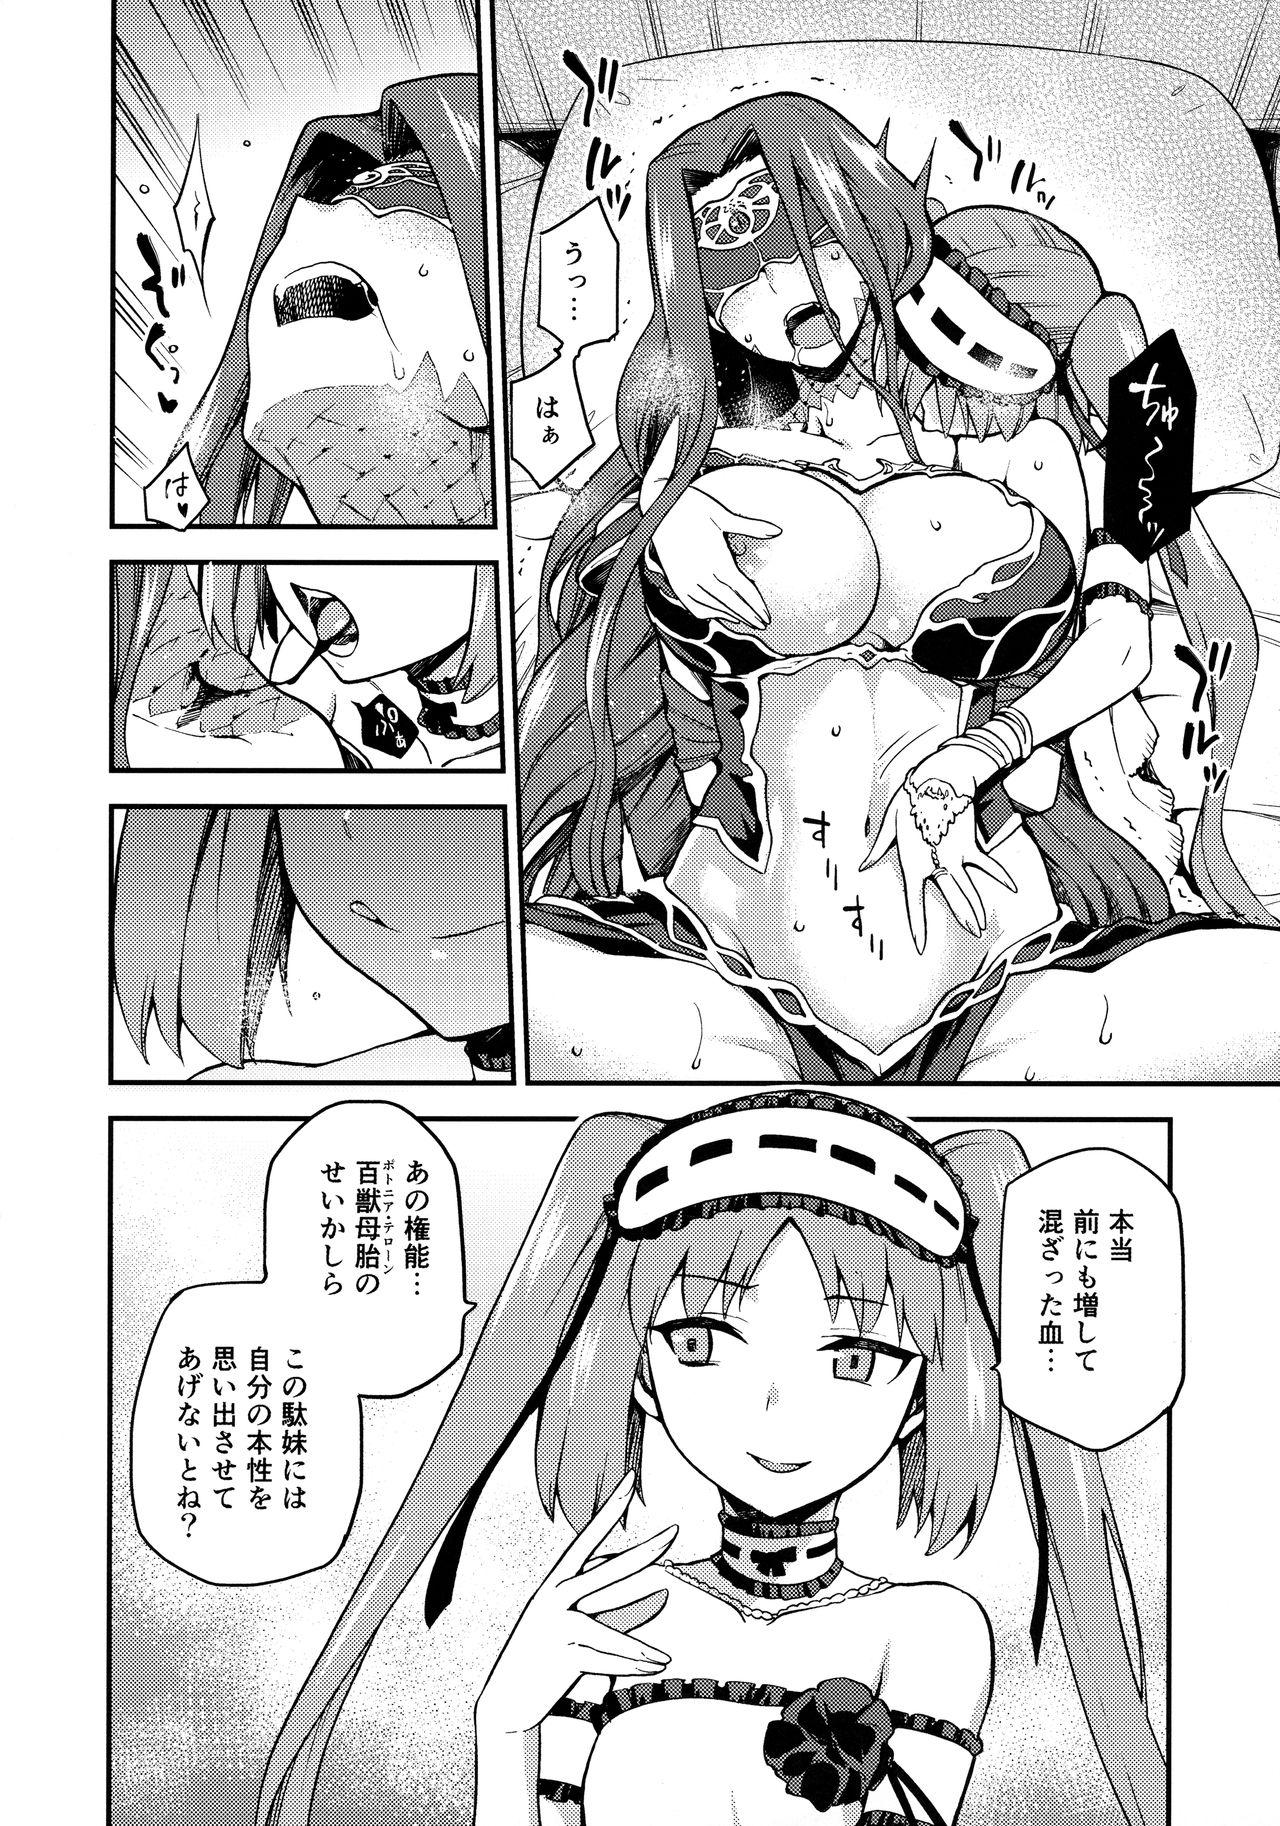 Pegging Hebigami no Honnou - Fate grand order Cunt - Page 7